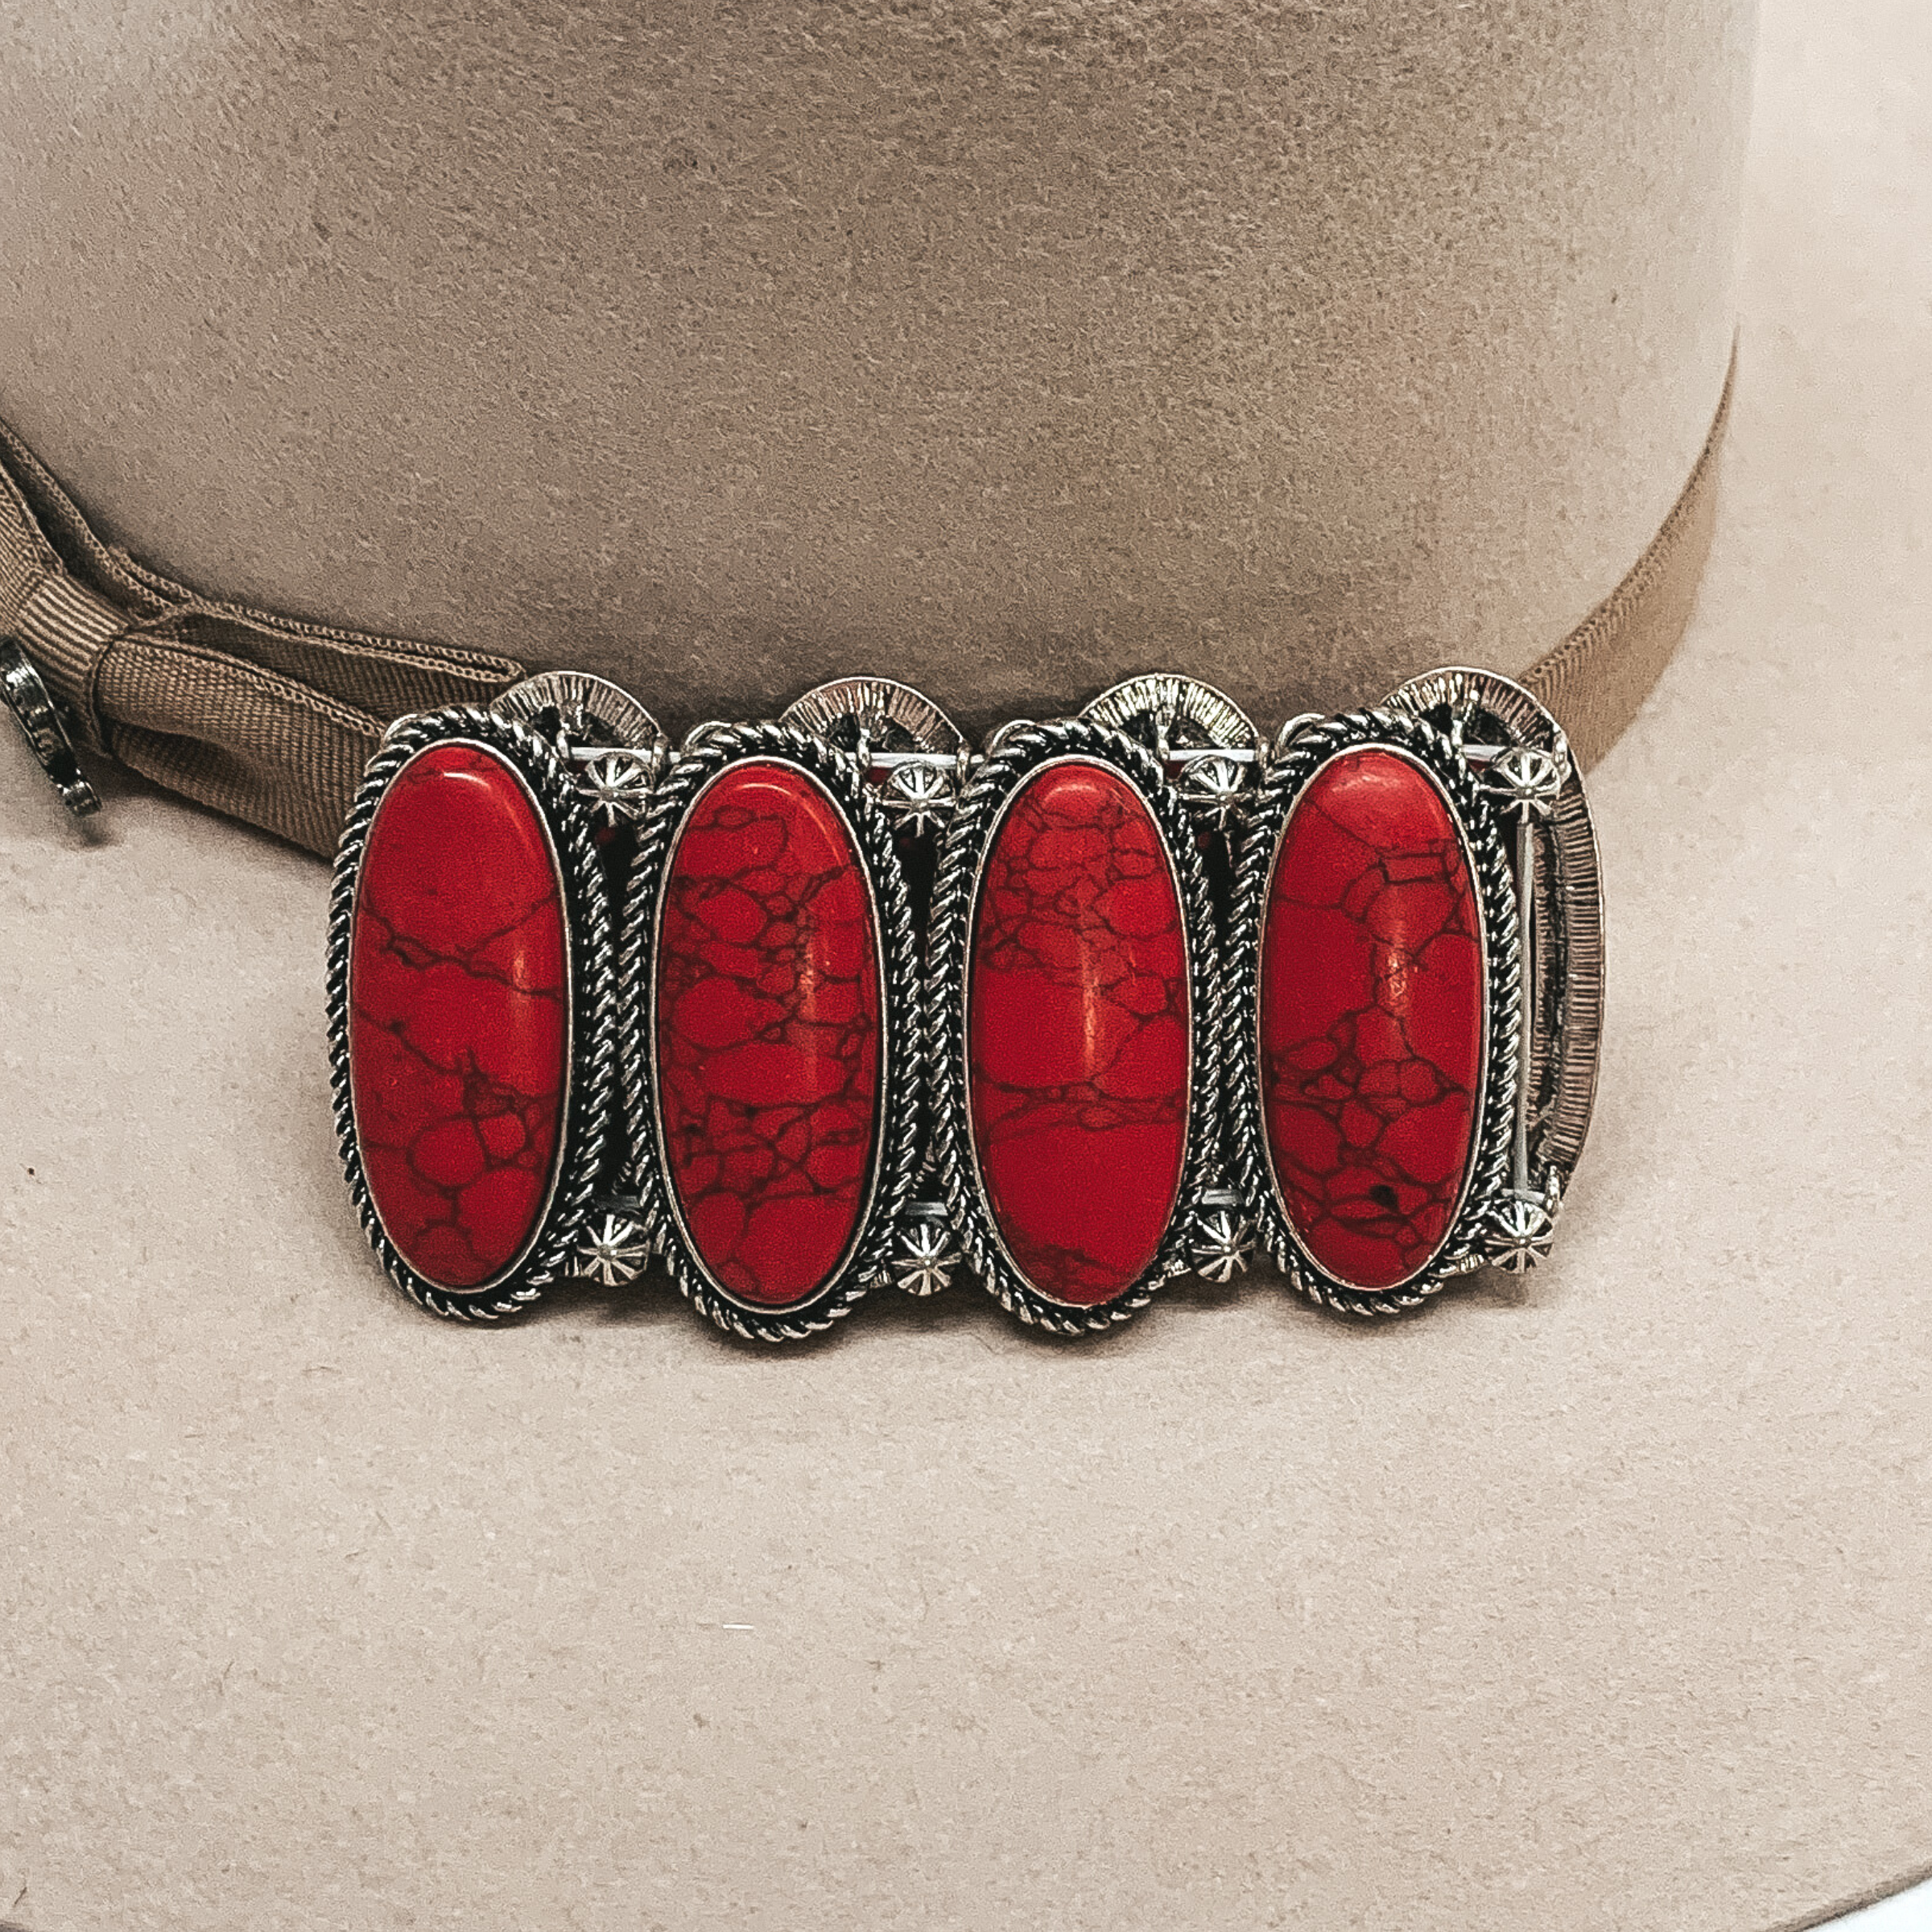 Silver bracelet with big oval red stones pictured laying on a beige background.